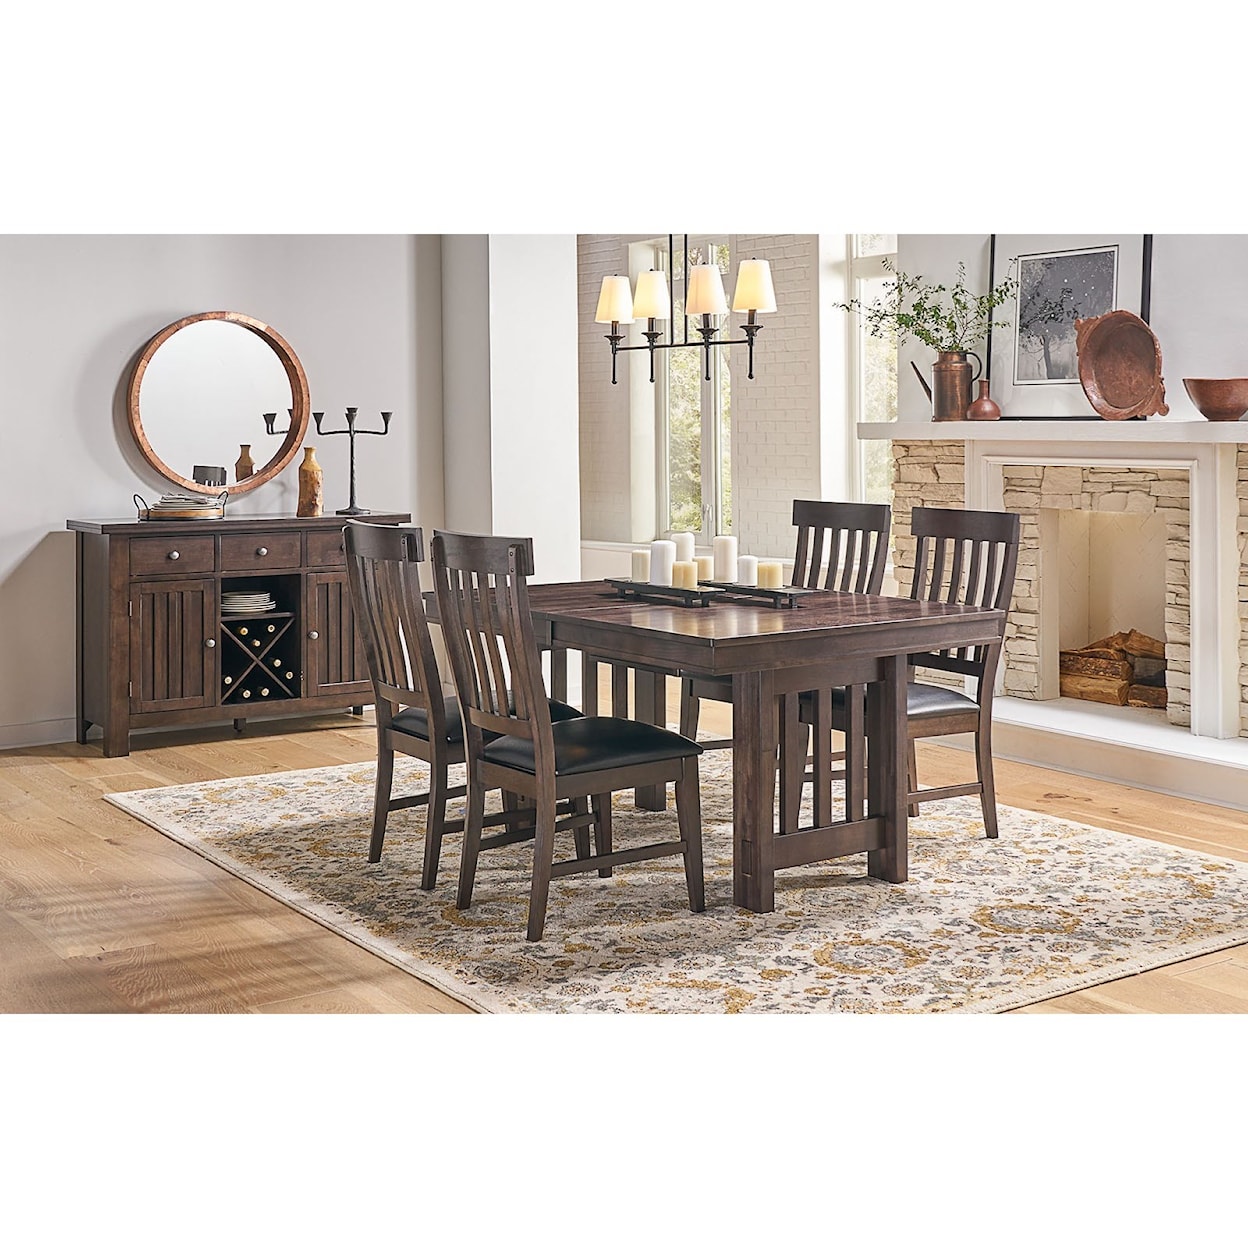 AAmerica Bremerton 5-Piece Table and Chair Set